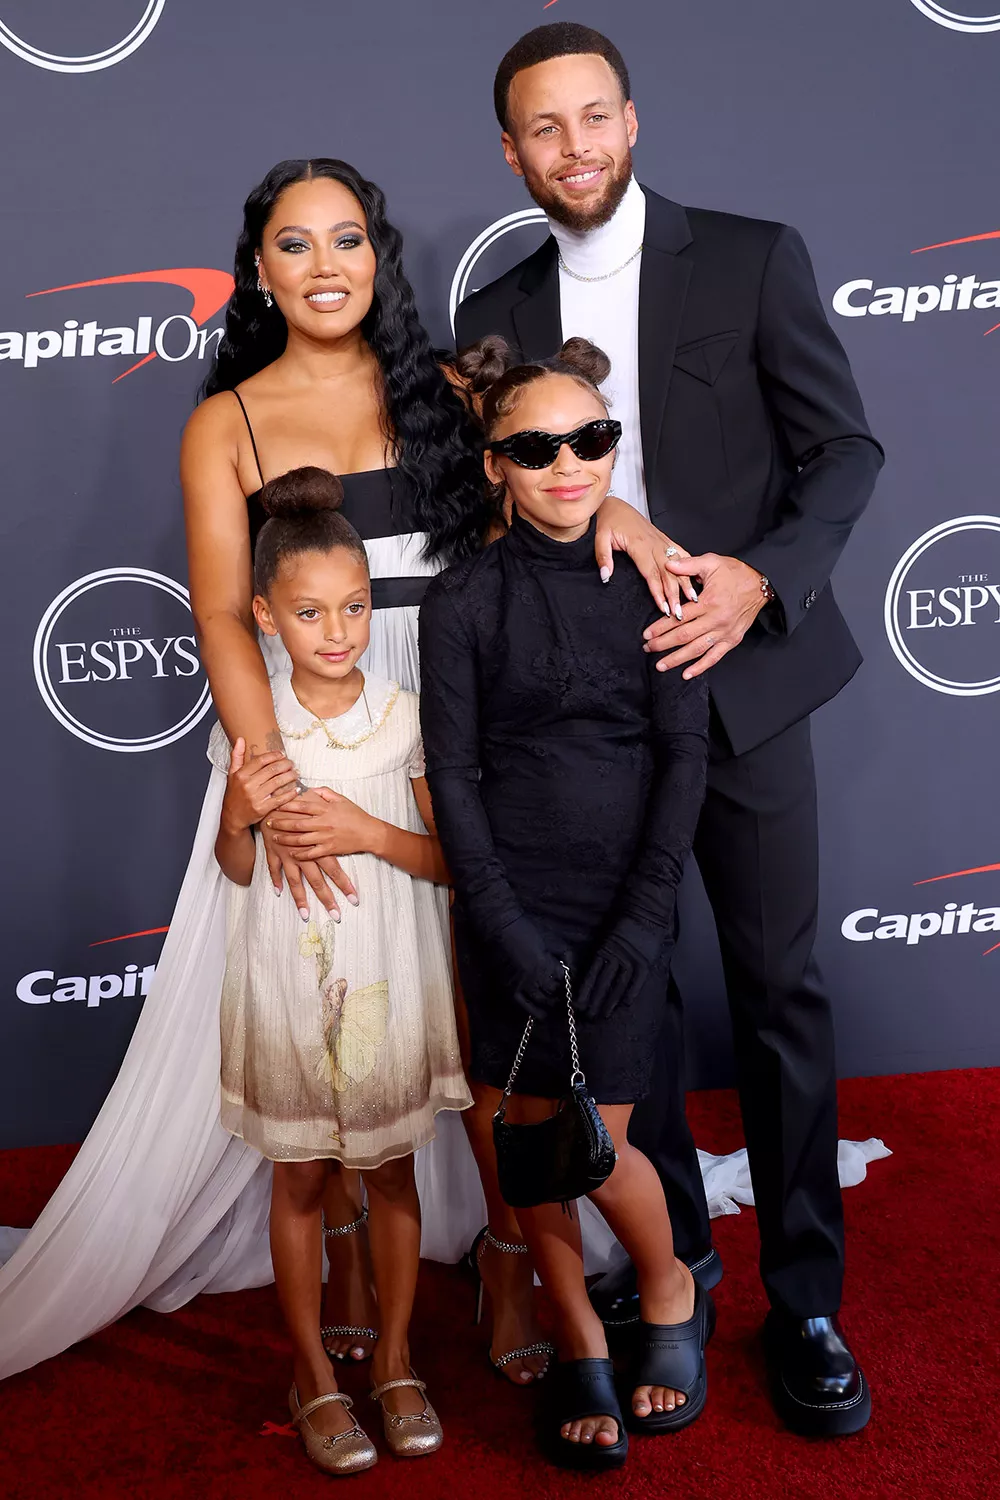 Ryan Carson Curry, Ayesha Curry, Riley Elizabeth Curry, and Stephen Curry attend the 2022 ESPYs at Dolby Theatre